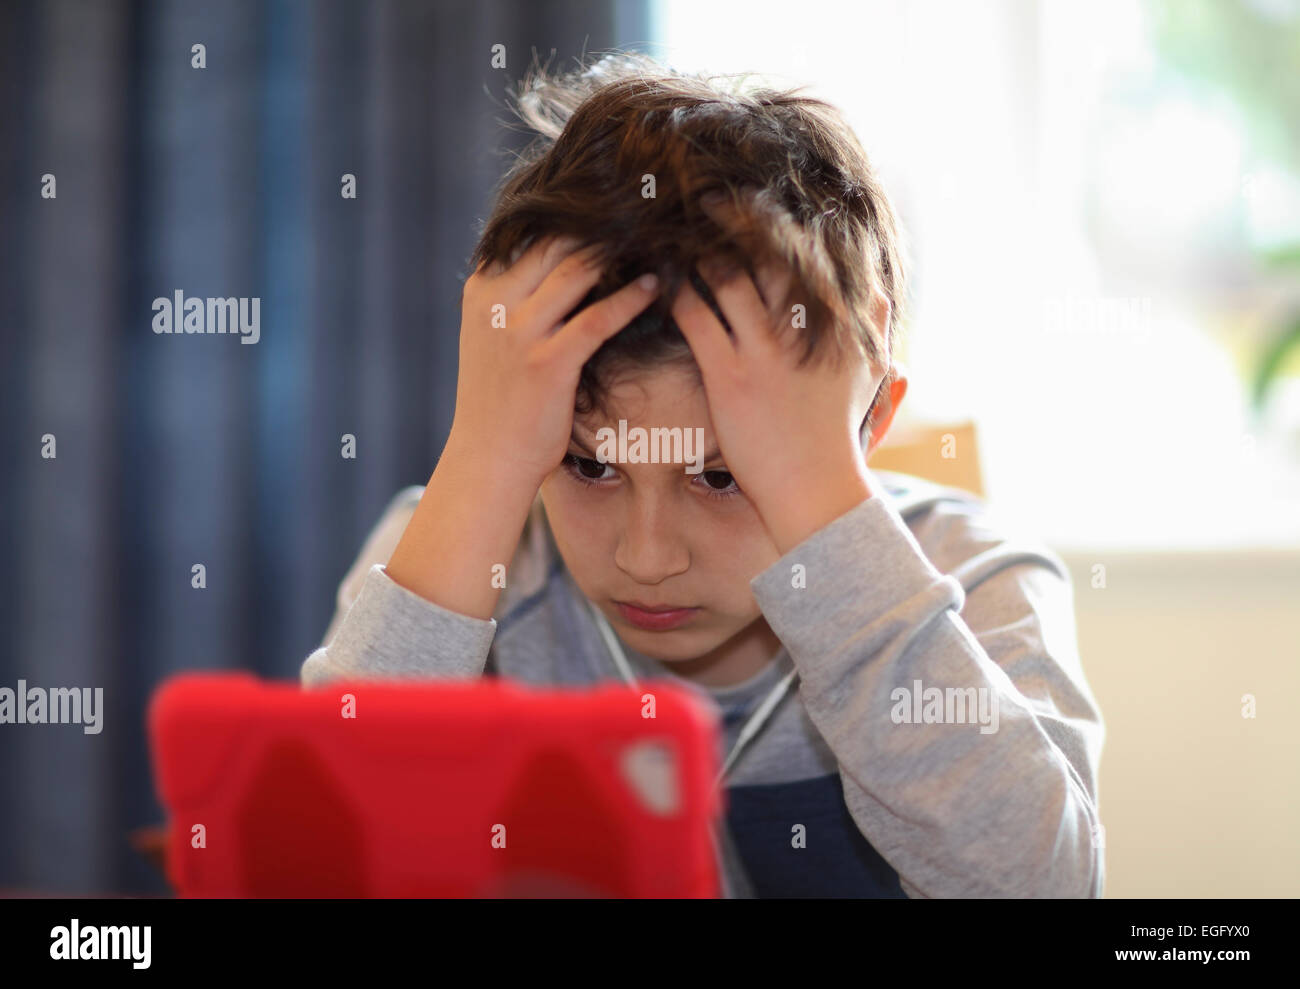 Concentrating young boy playing with tablet computer Stock Photo